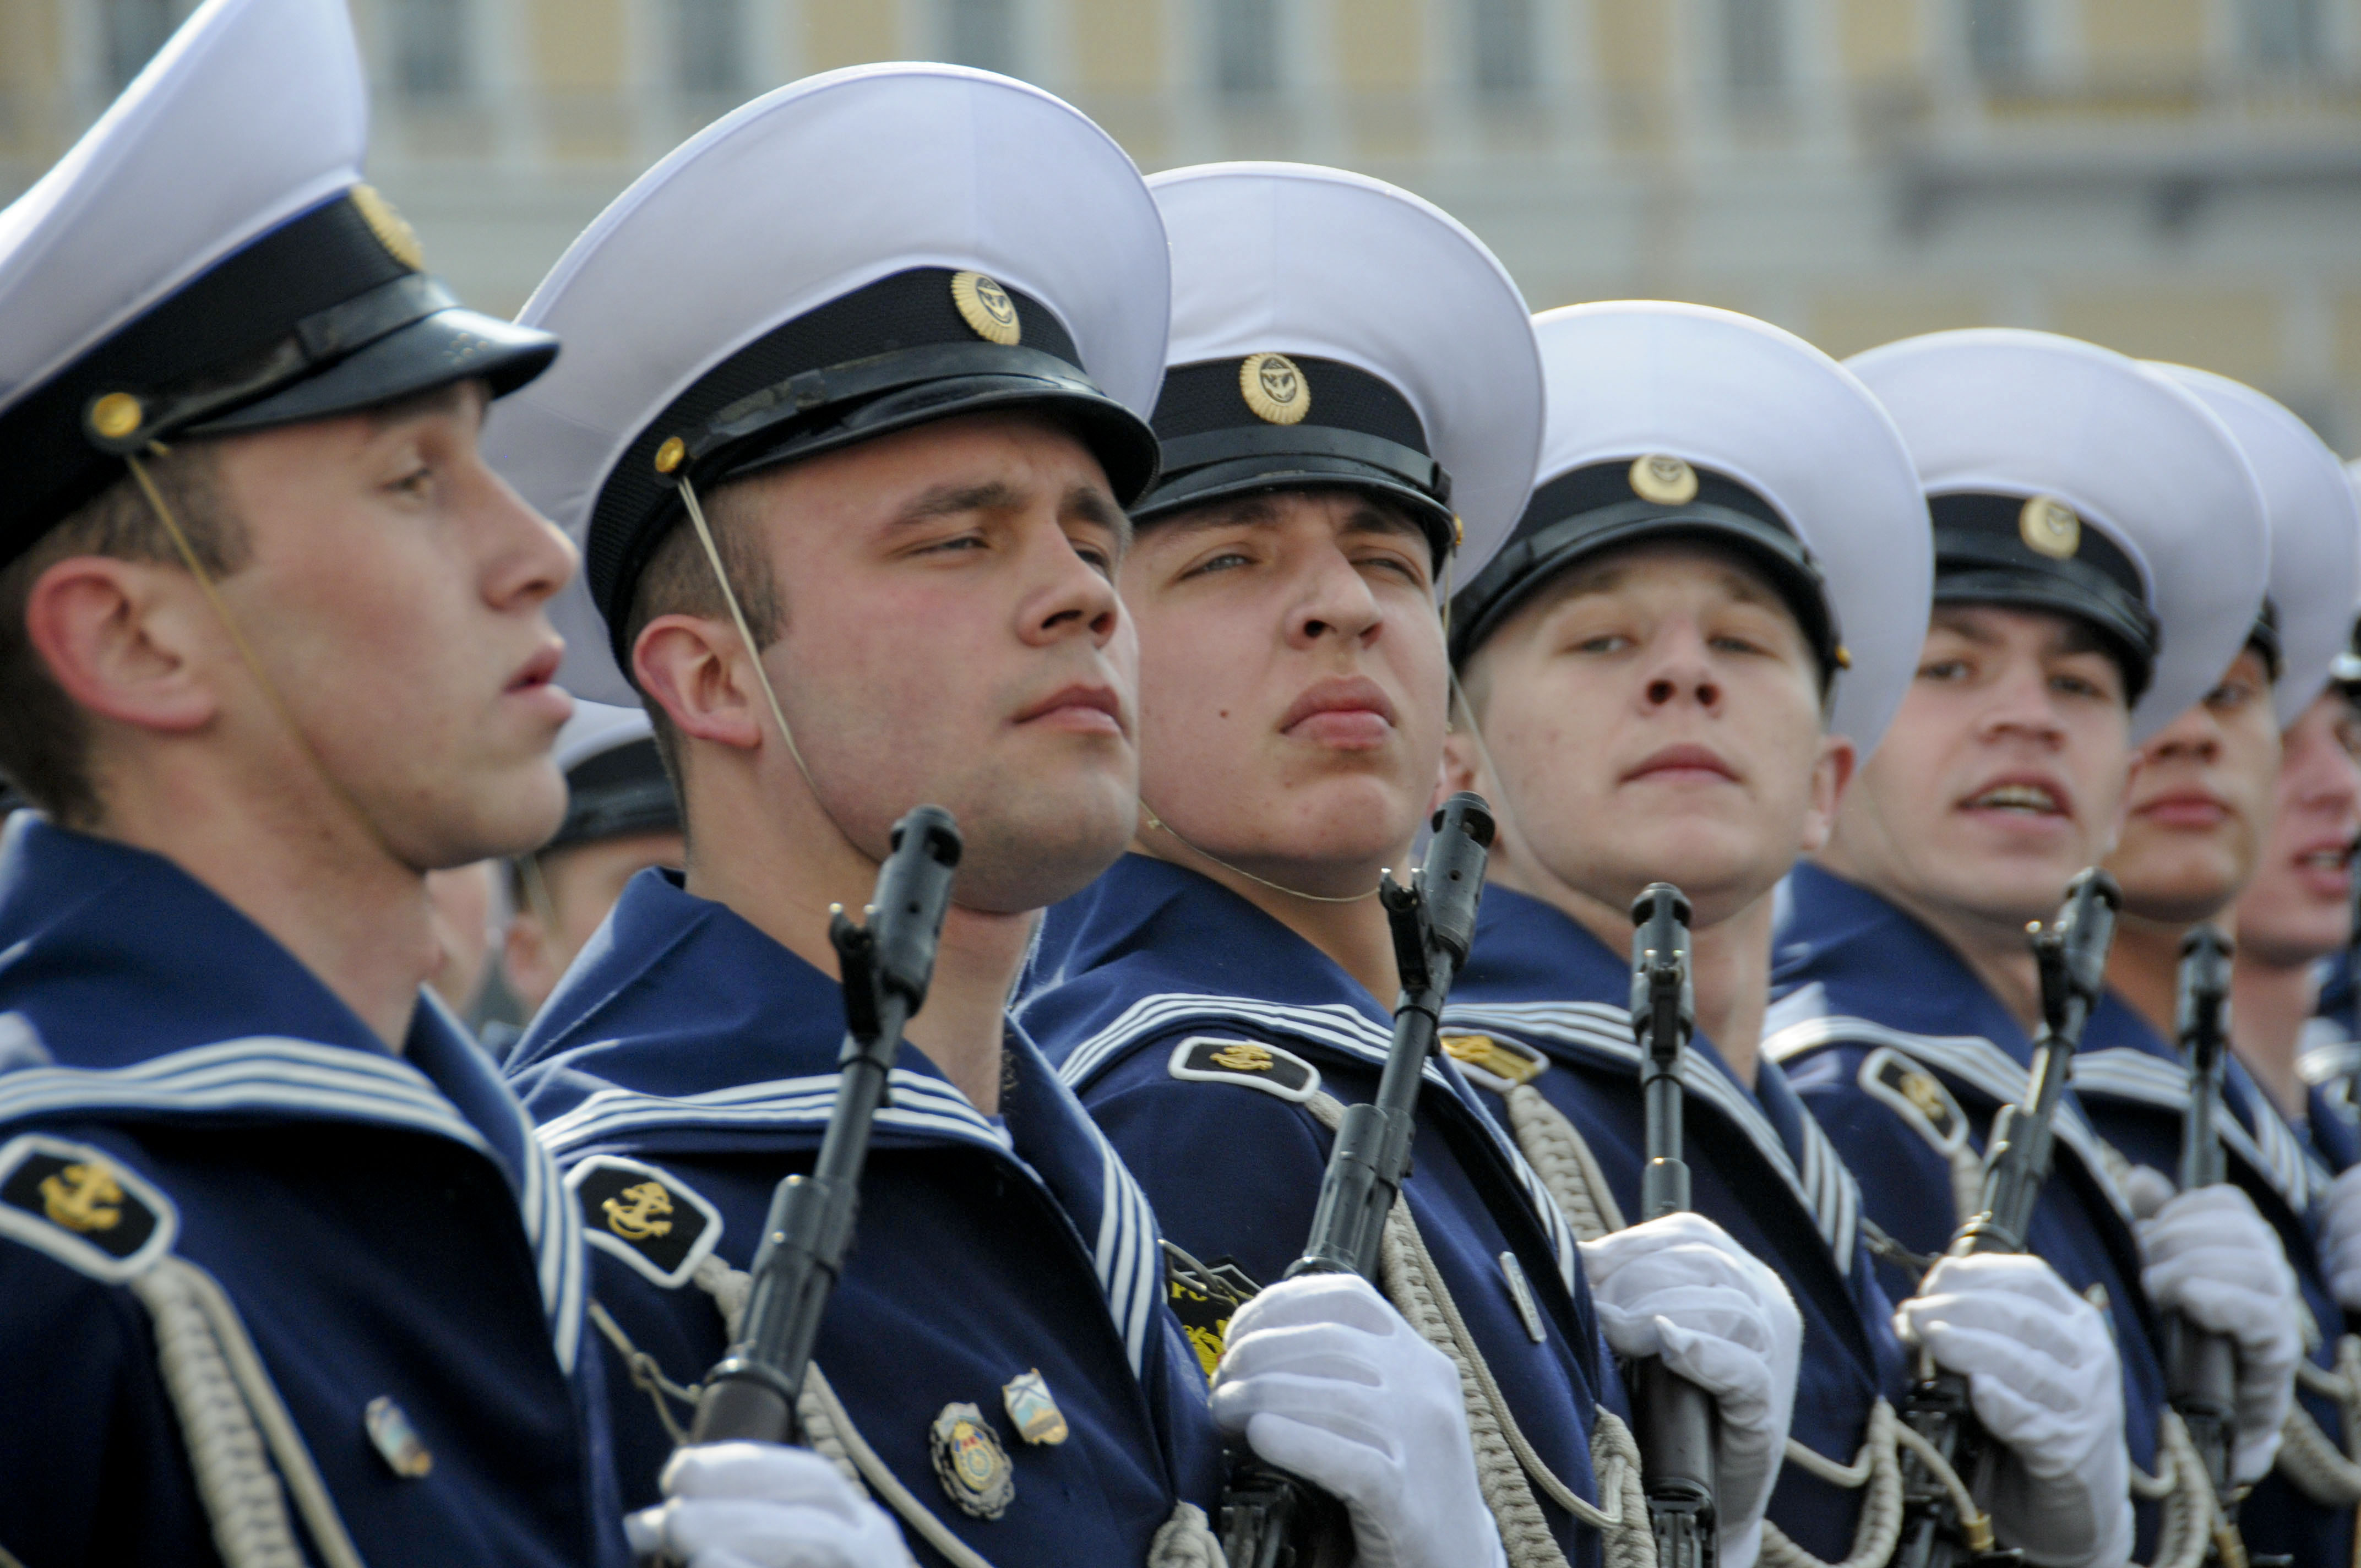 100510-N-9815L-094 ST. PETERSBURG, Russia (May 10, 2010) Russian sailors march in formation during the opening ceremony of the 65th anniversary of the Victory in Europe Day parade. The Russian minister of defense invited Vice Adm. Harry B. Harris Jr., commander of the U.S. 6th Fleet, and the crew of the guided-missile frigate USS Kauffman (FFG 59) to participate in the celebration. (U.S. Navy photo by Chief Mass Communication Specialist Michael Lewis/Released)